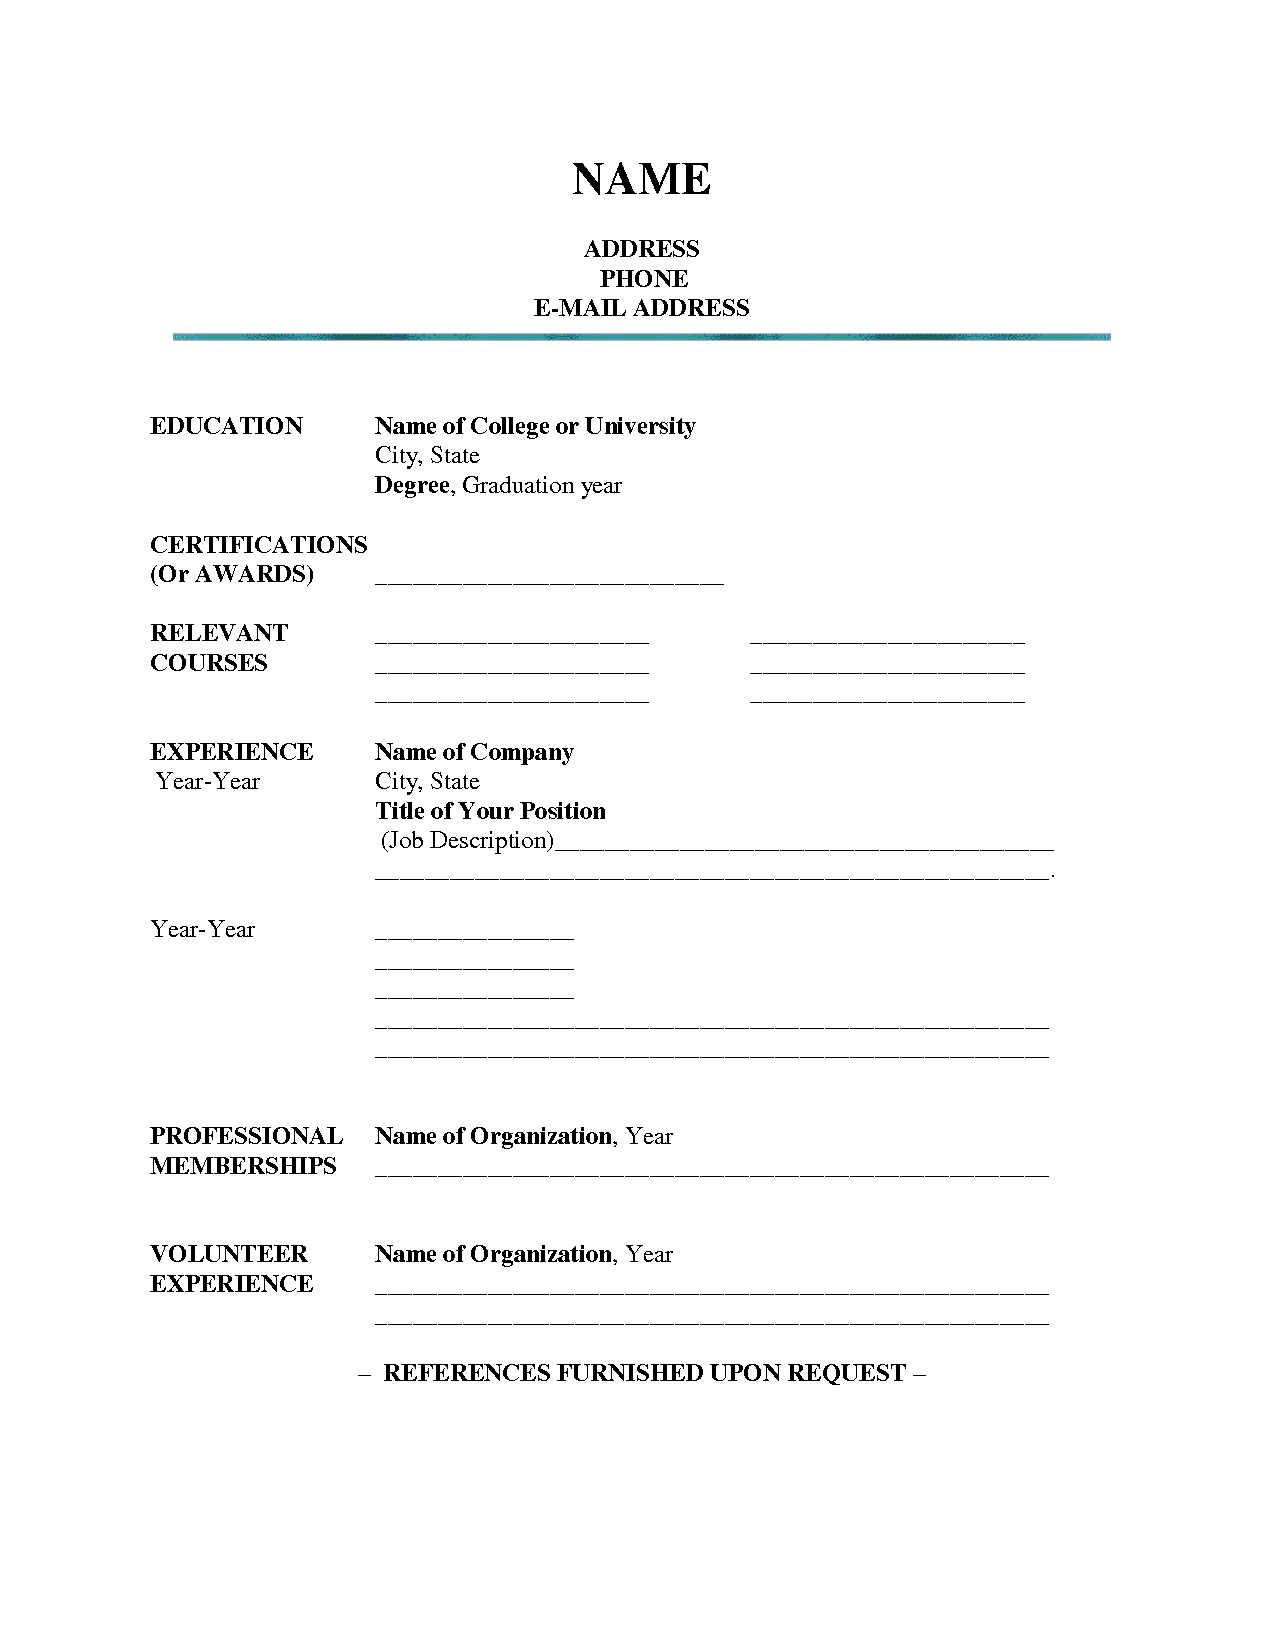 blank-cv-template-examples-in-microsoft-word-format-invitation